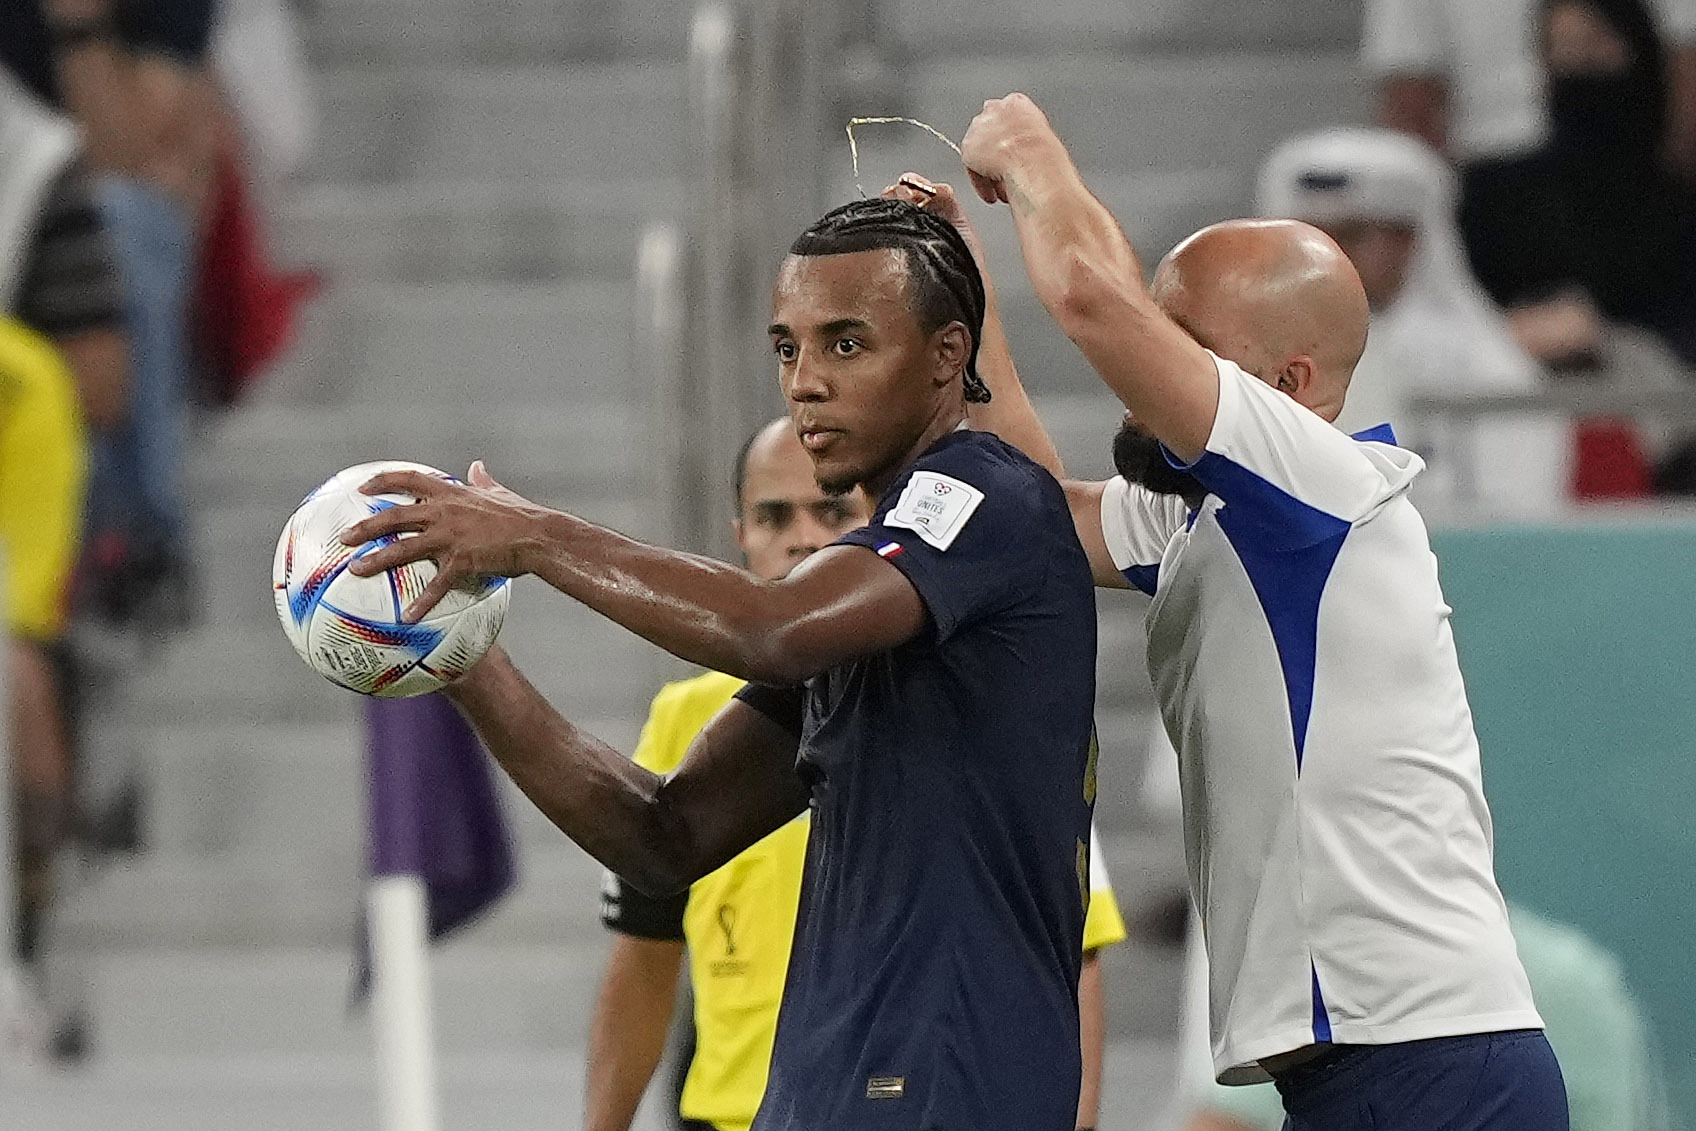 An assistant coach takes off the necklace of France's Jules Kounde during the World Cup soccer match between France and Poland at the Al Thumama Stadium in Doha, Qatar, on Sunday.